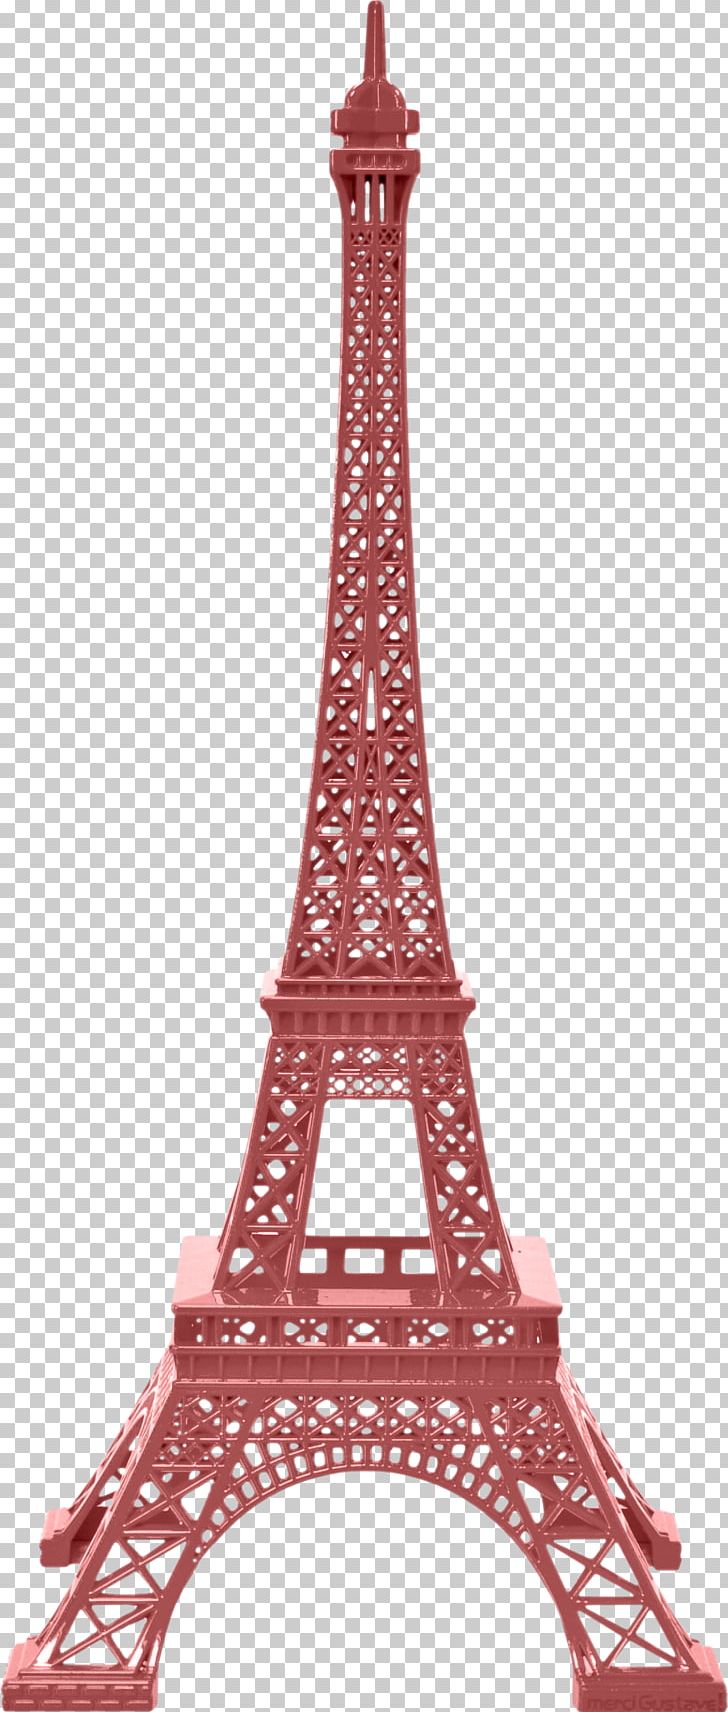 Eiffel Tower Statue Of Liberty Black And White PNG, Clipart, Black, Black And White, Color, Eiffel Tower, Landmark Free PNG Download